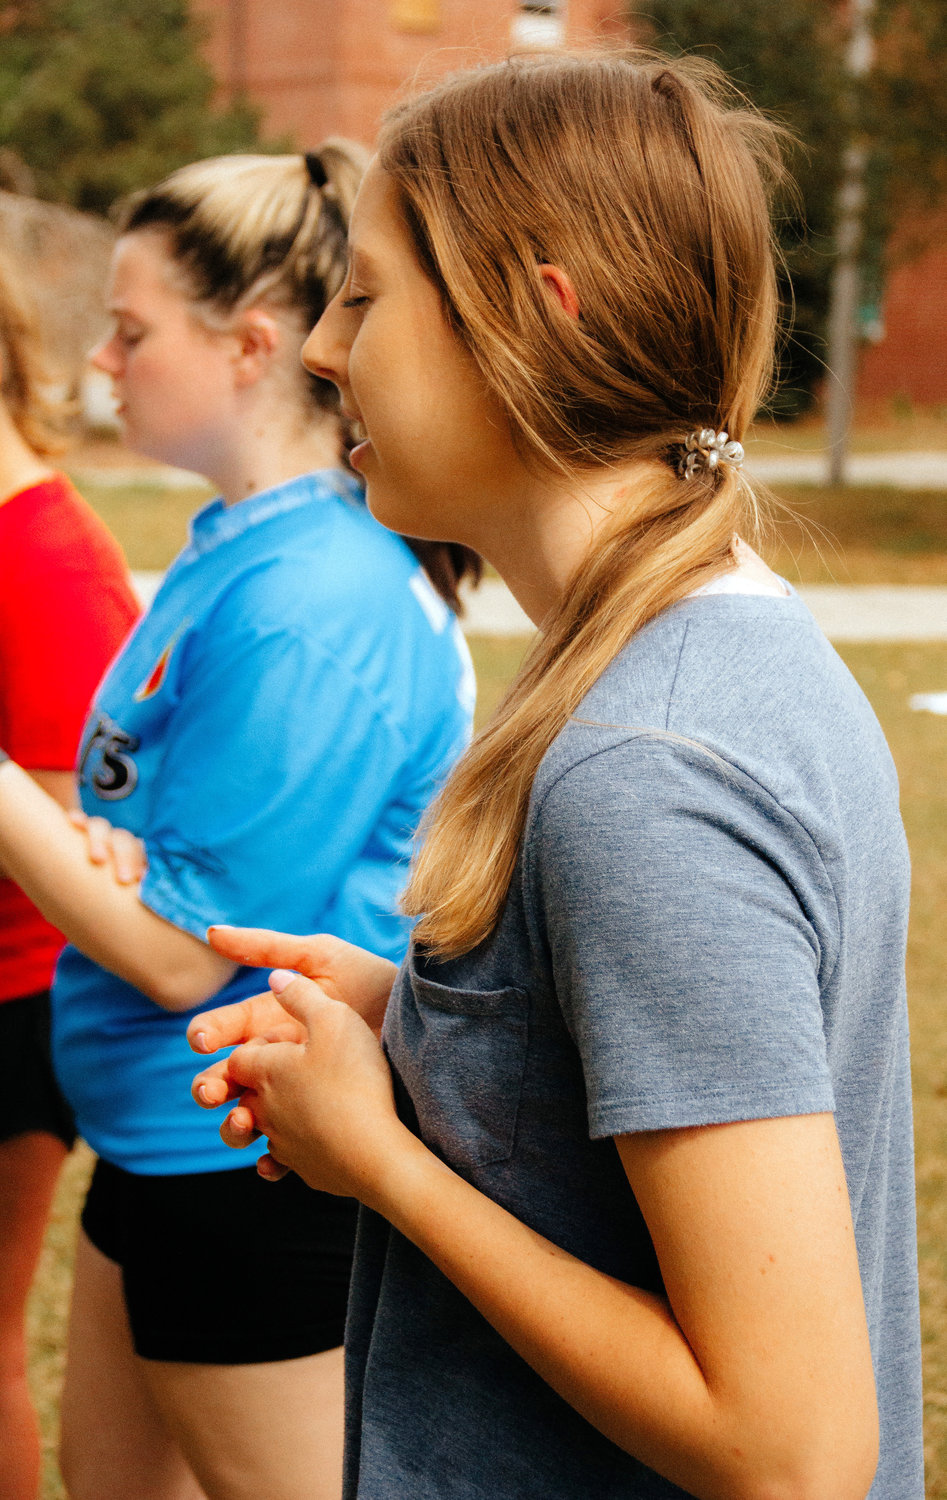 A student prays during a Collegiate Day of Prayer event at Georgia Southern University's Armstrong Campus in Savannah, Ga., Thursday, Feb. 23, 2023.